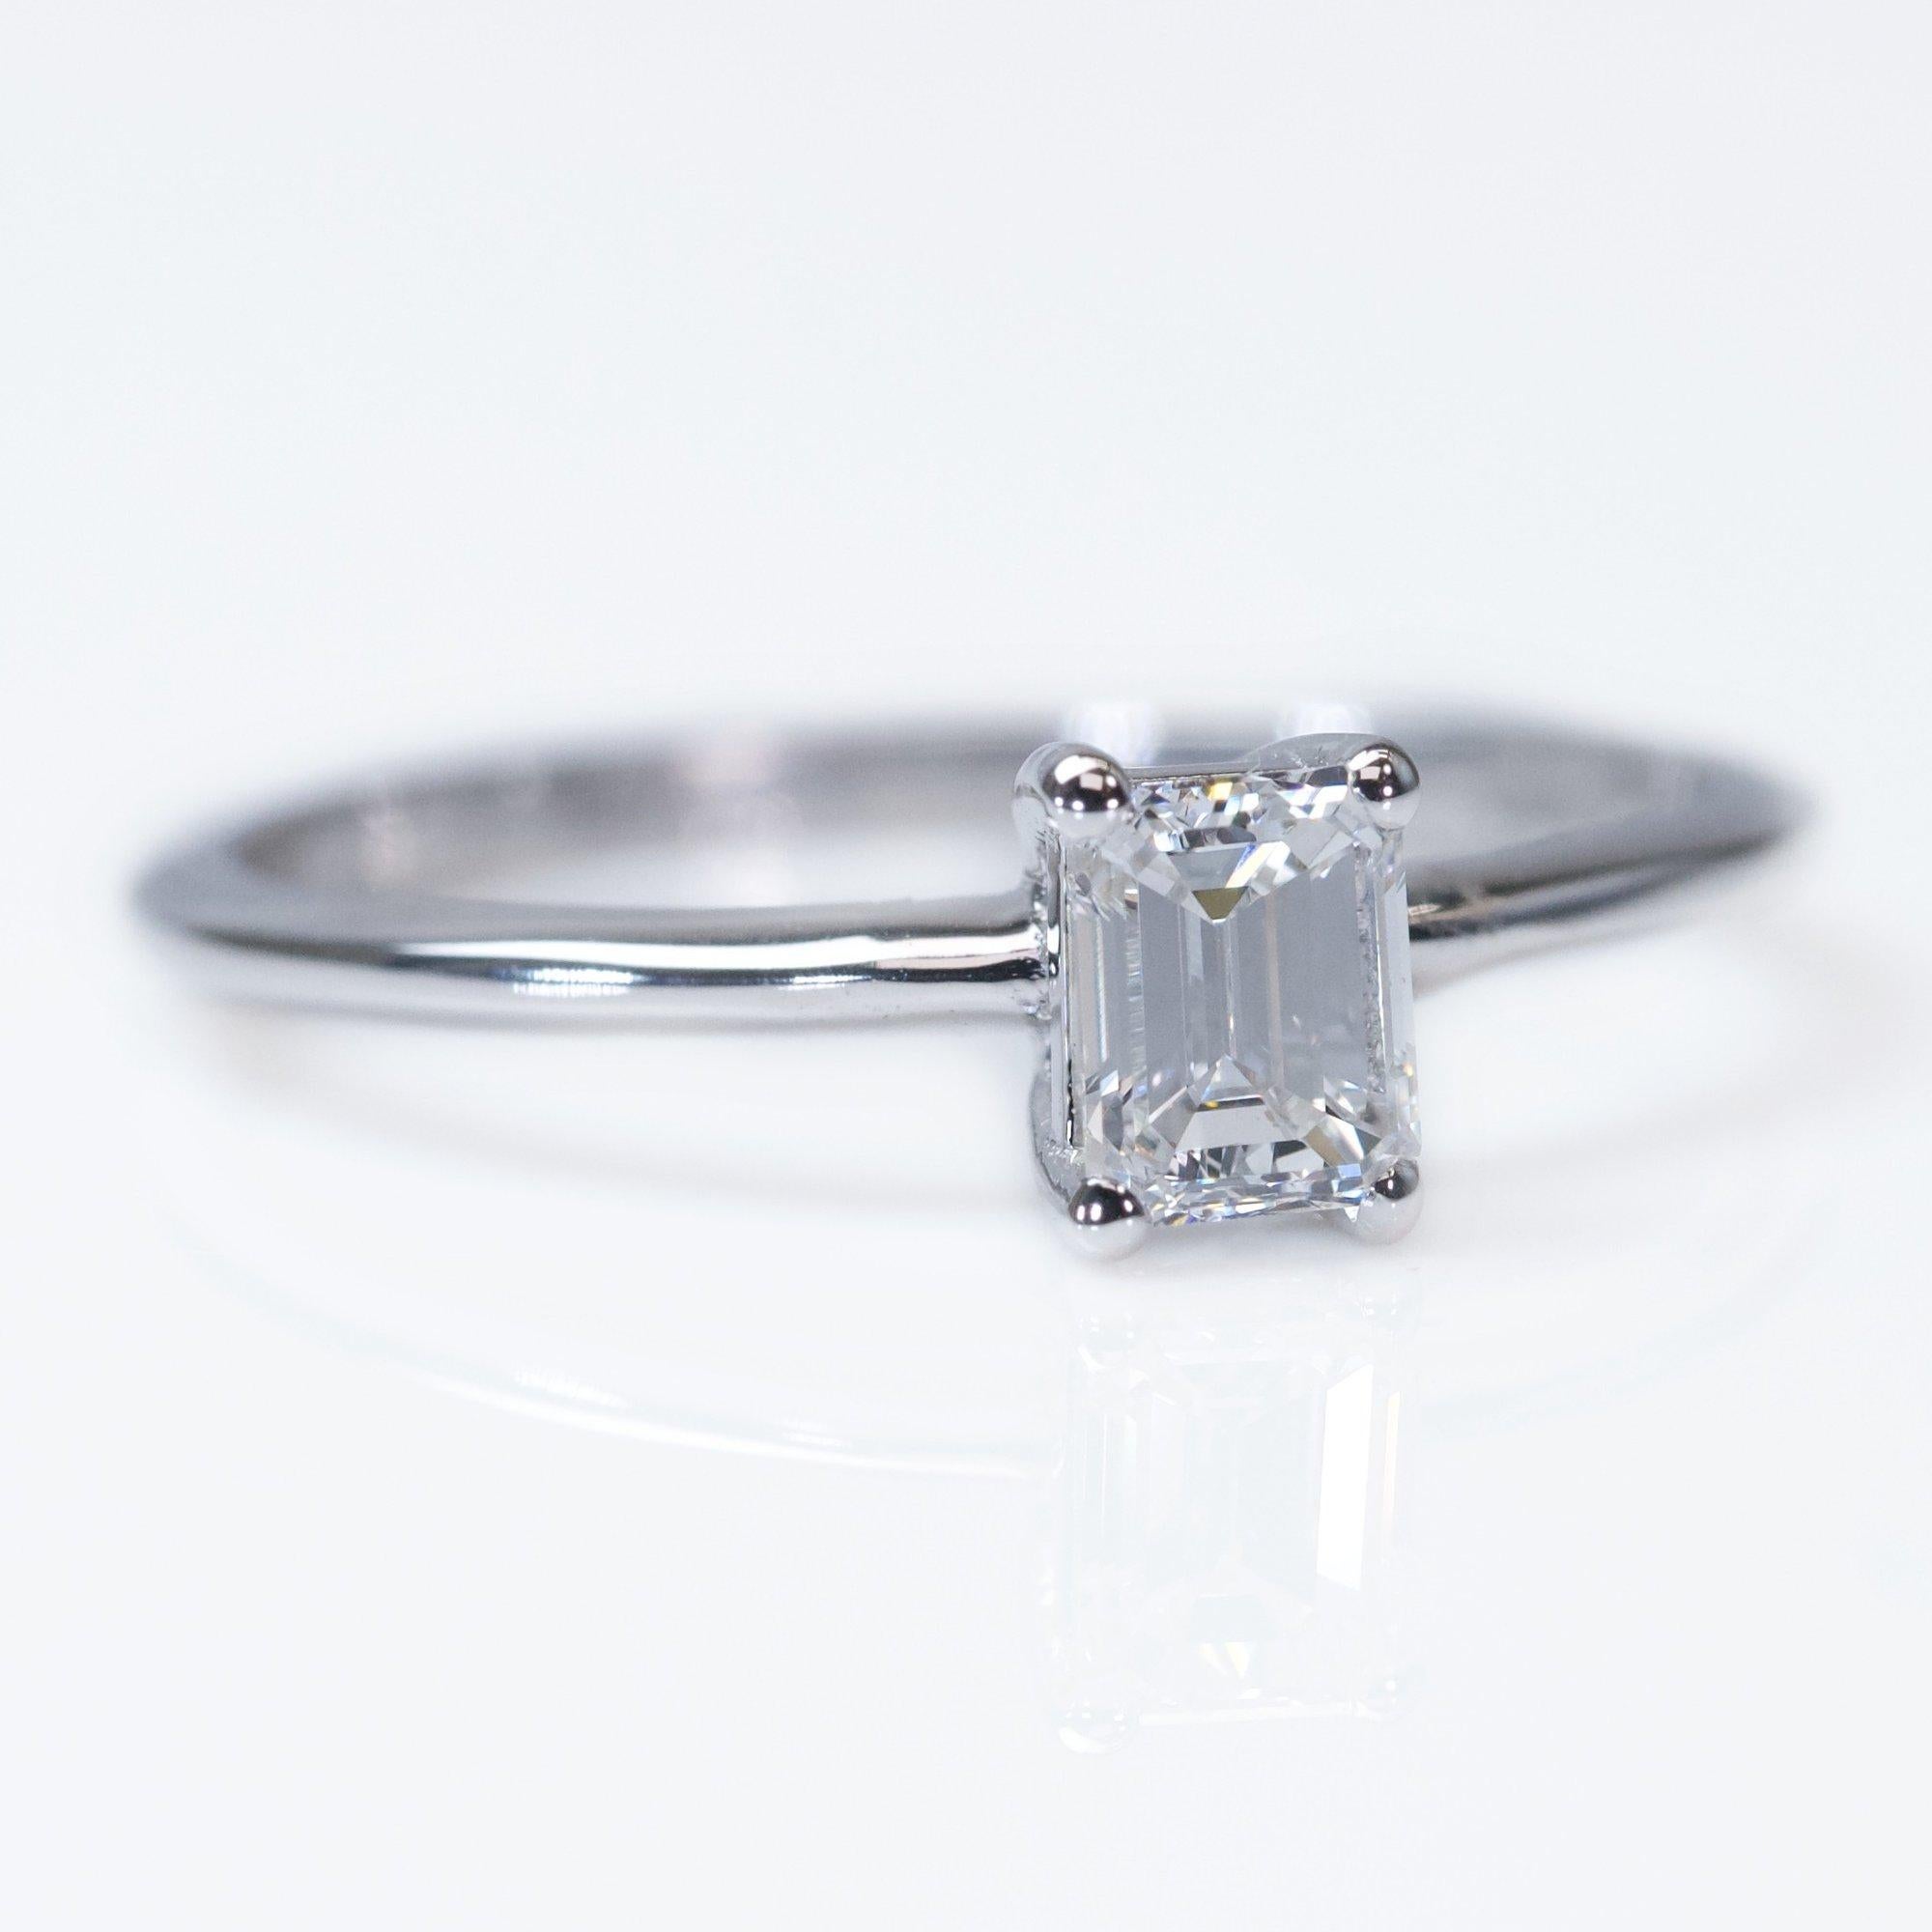 Emerald Cut Classic 18K White Gold Ring with 0.41 carat Natural Diamond- GIA Certificate For Sale